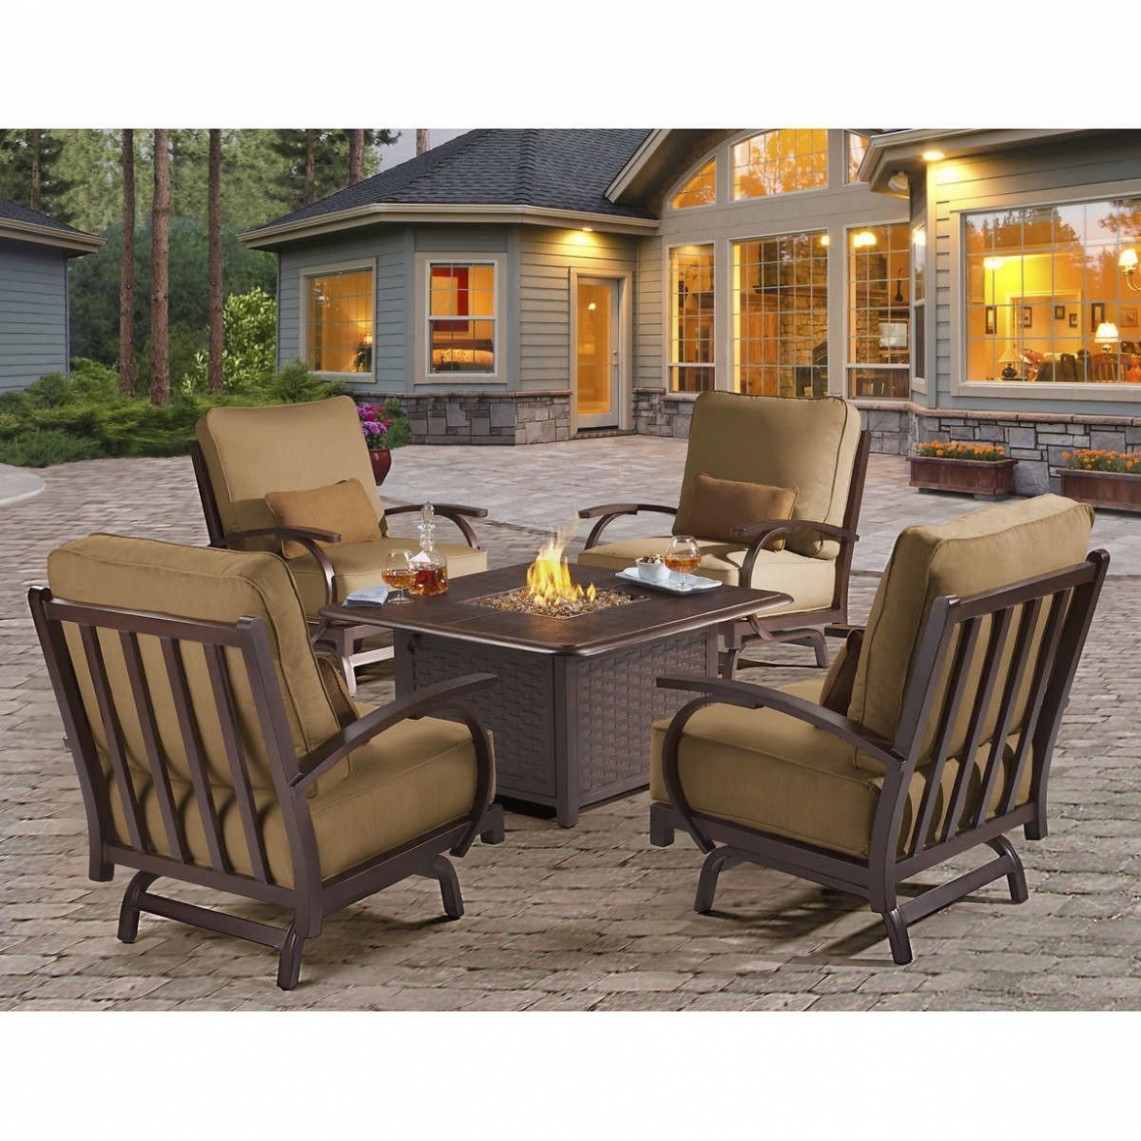 Patio Sets With Fire Pit
 25 Inspirations of Fire Pit Patio Furniture Sets